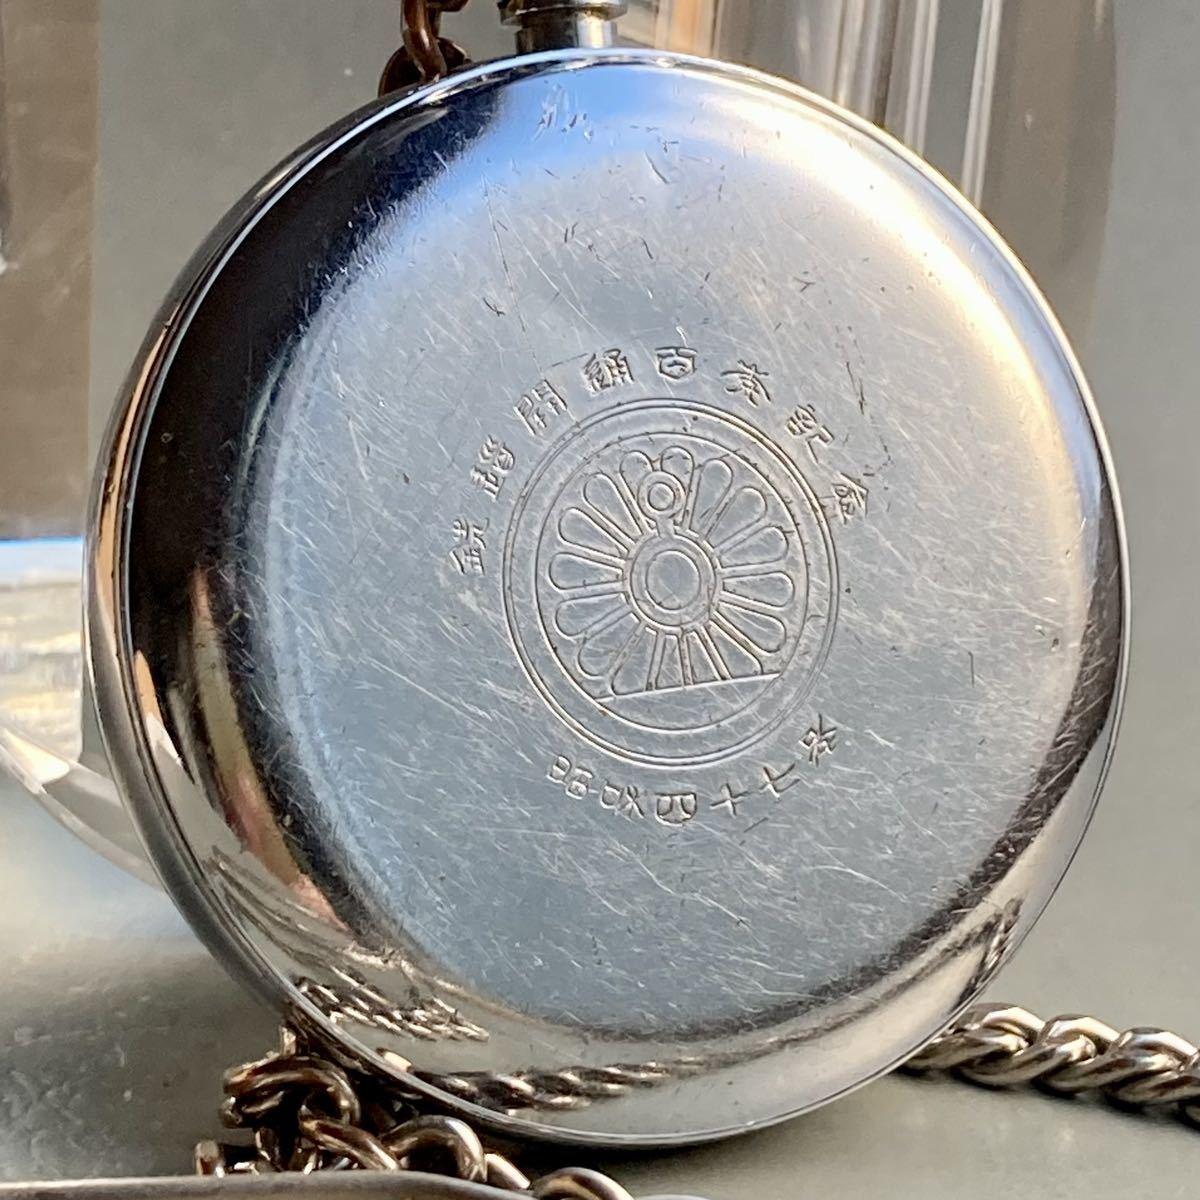 Seiko Pocket Watch Antique Railway Manual with Chain Silver 49mm Vintage - Murphy Johnson Watches Co.